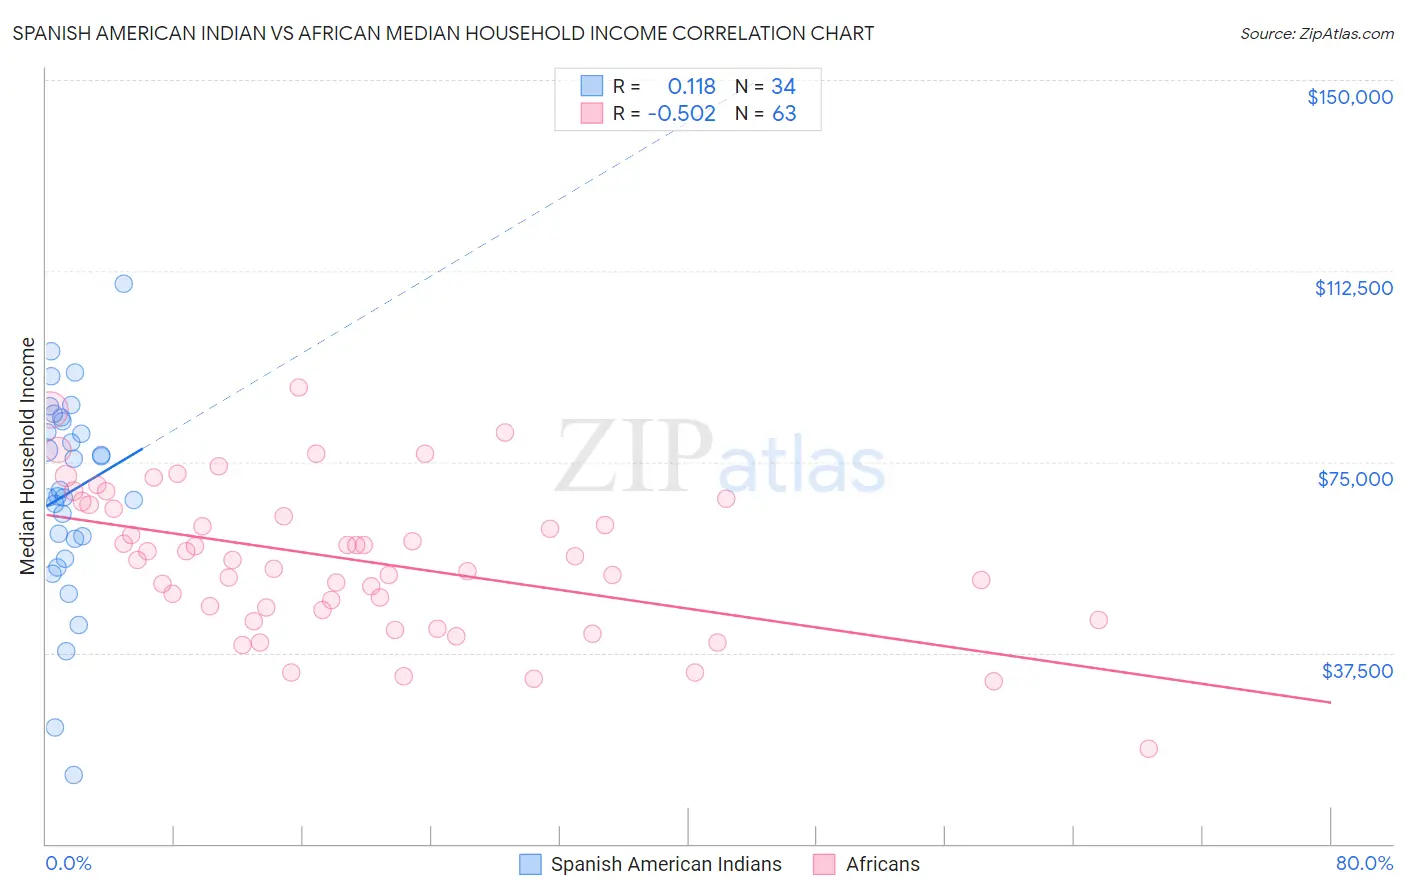 Spanish American Indian vs African Median Household Income